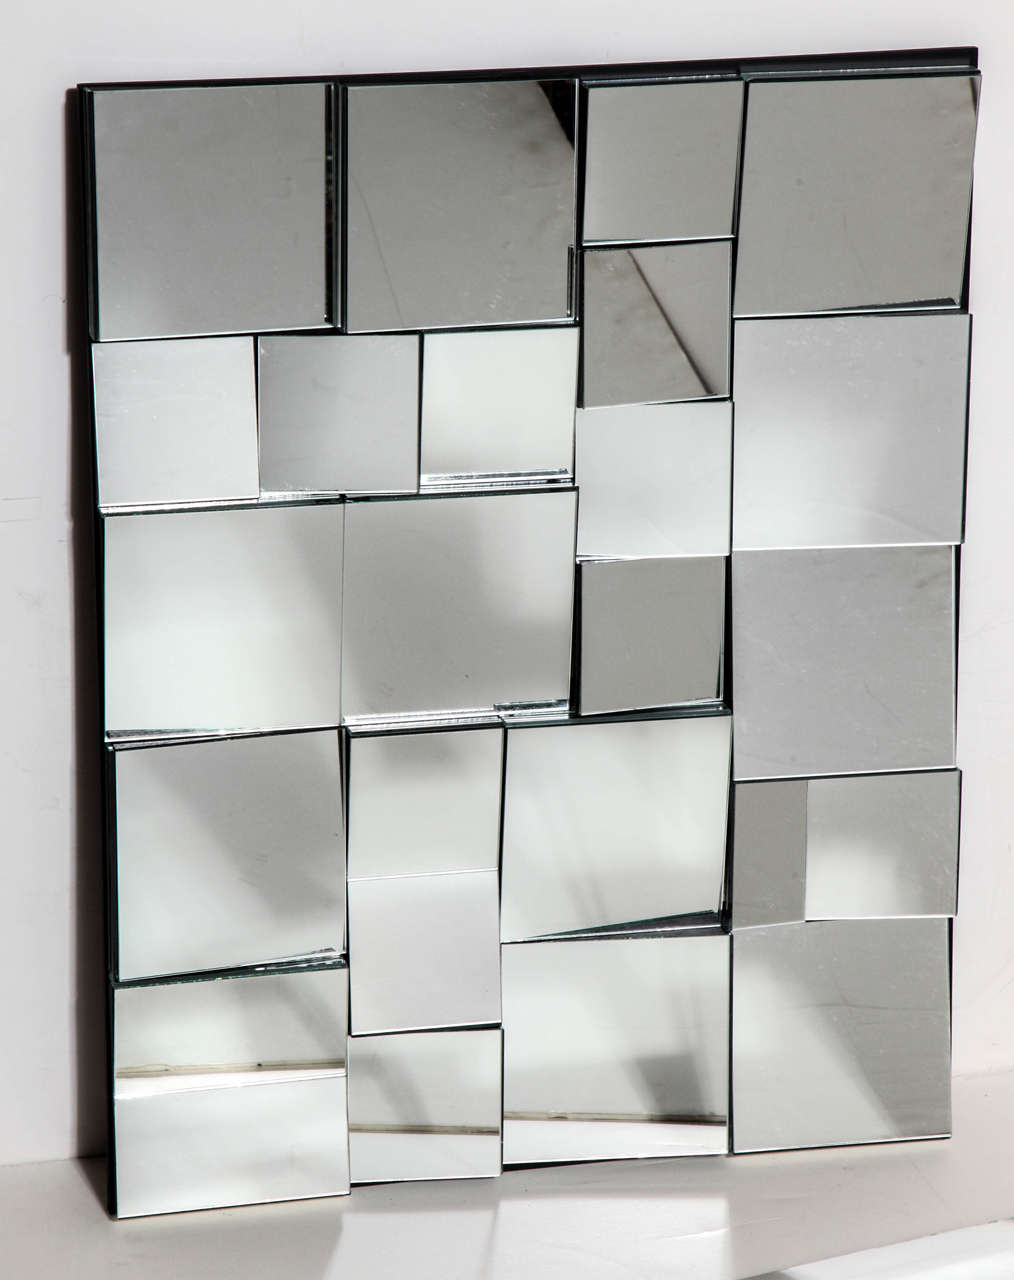 Neal Small faceted Smaller Slopes Mirror from 2000 Limited Edition Series of 35. Features multiple Mirror shapes on Black lacquered Wood frame. Number 25 in the series of 35. Hang horizontal or vertical. Never hung. While in New York Neal Small